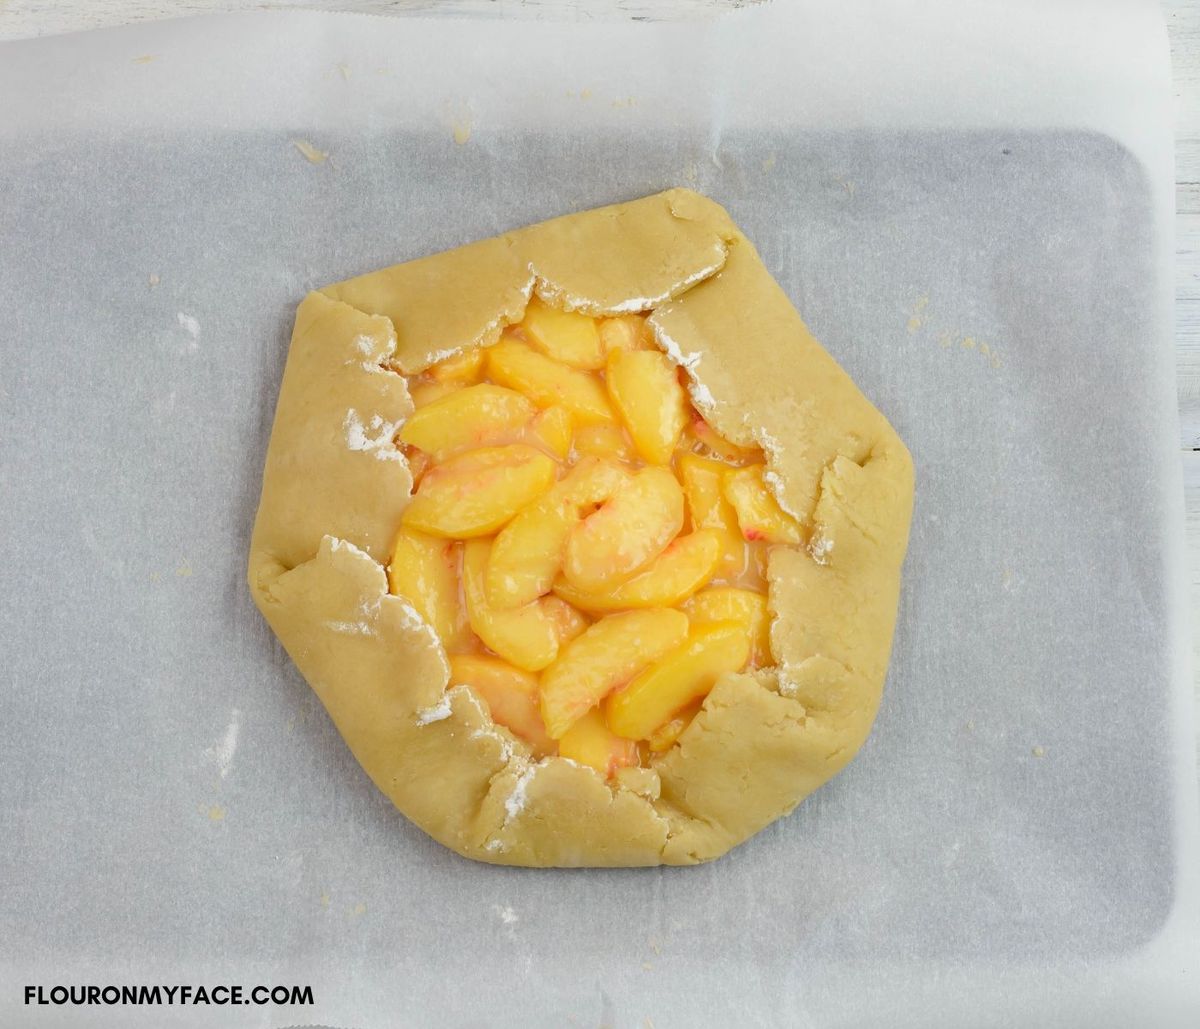 Example of how to fold the crust on a Rustic Peach Pie.